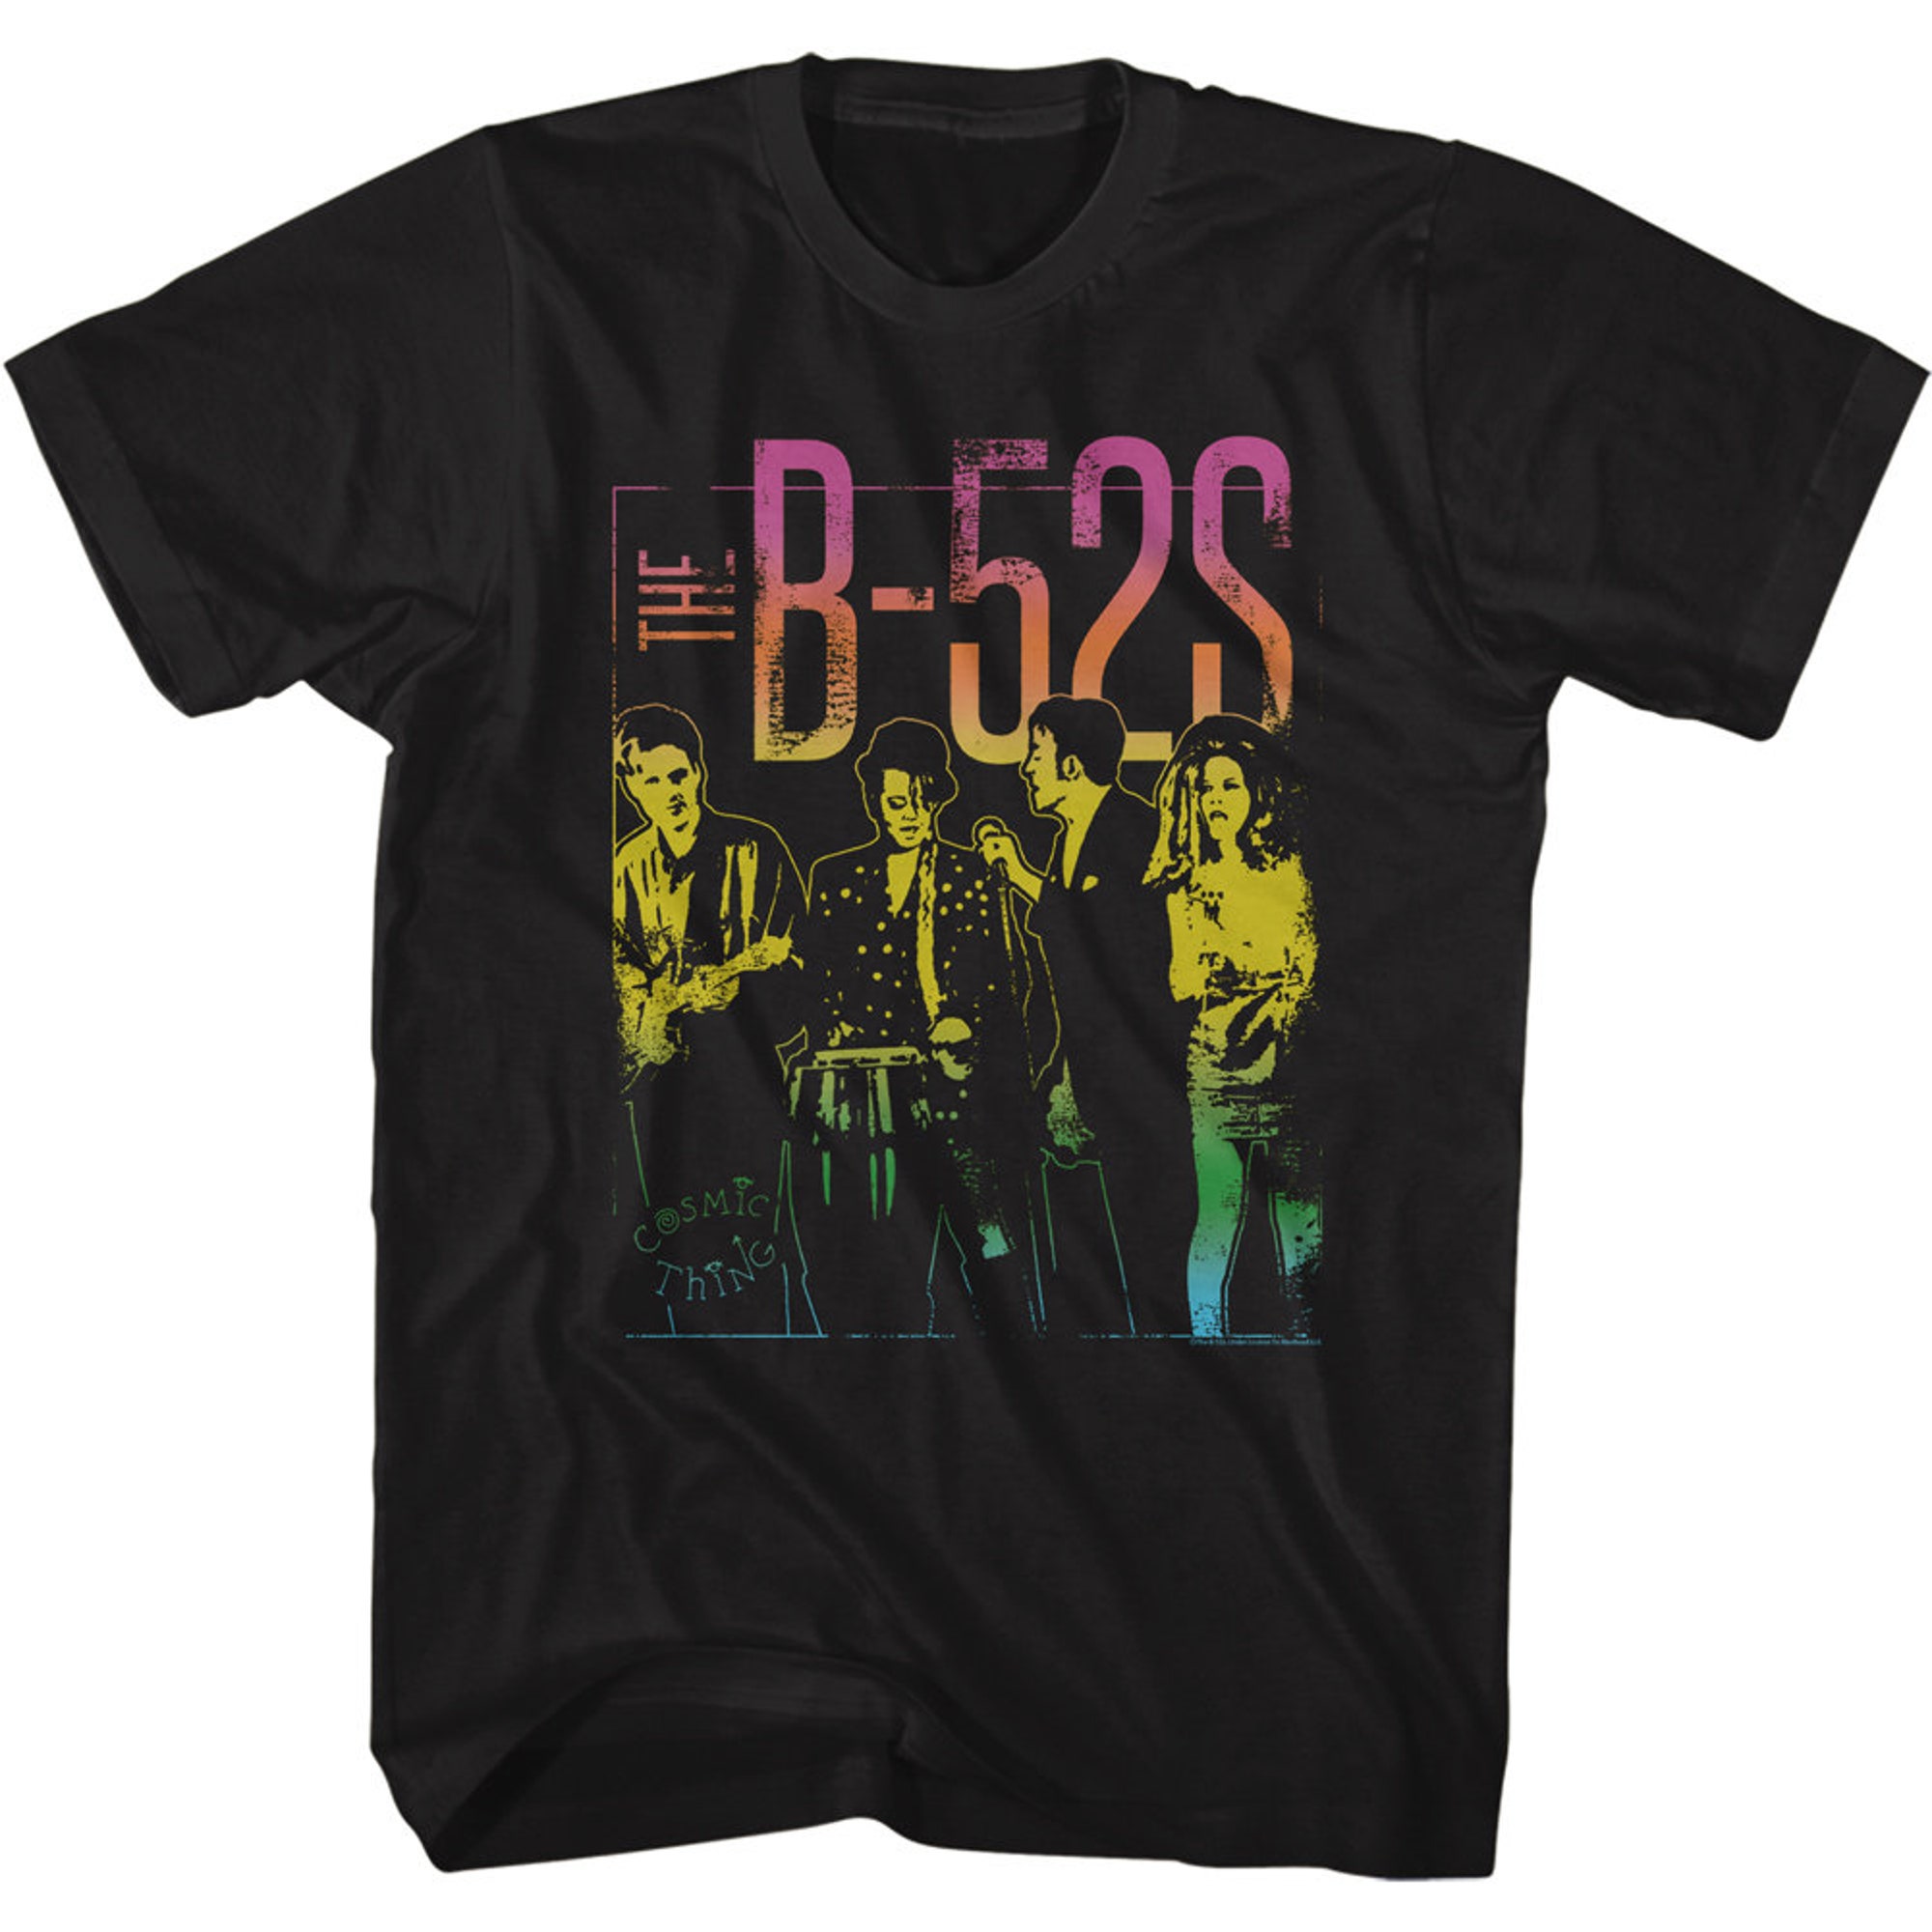 Discover The B52s Band Photo T-Shirt